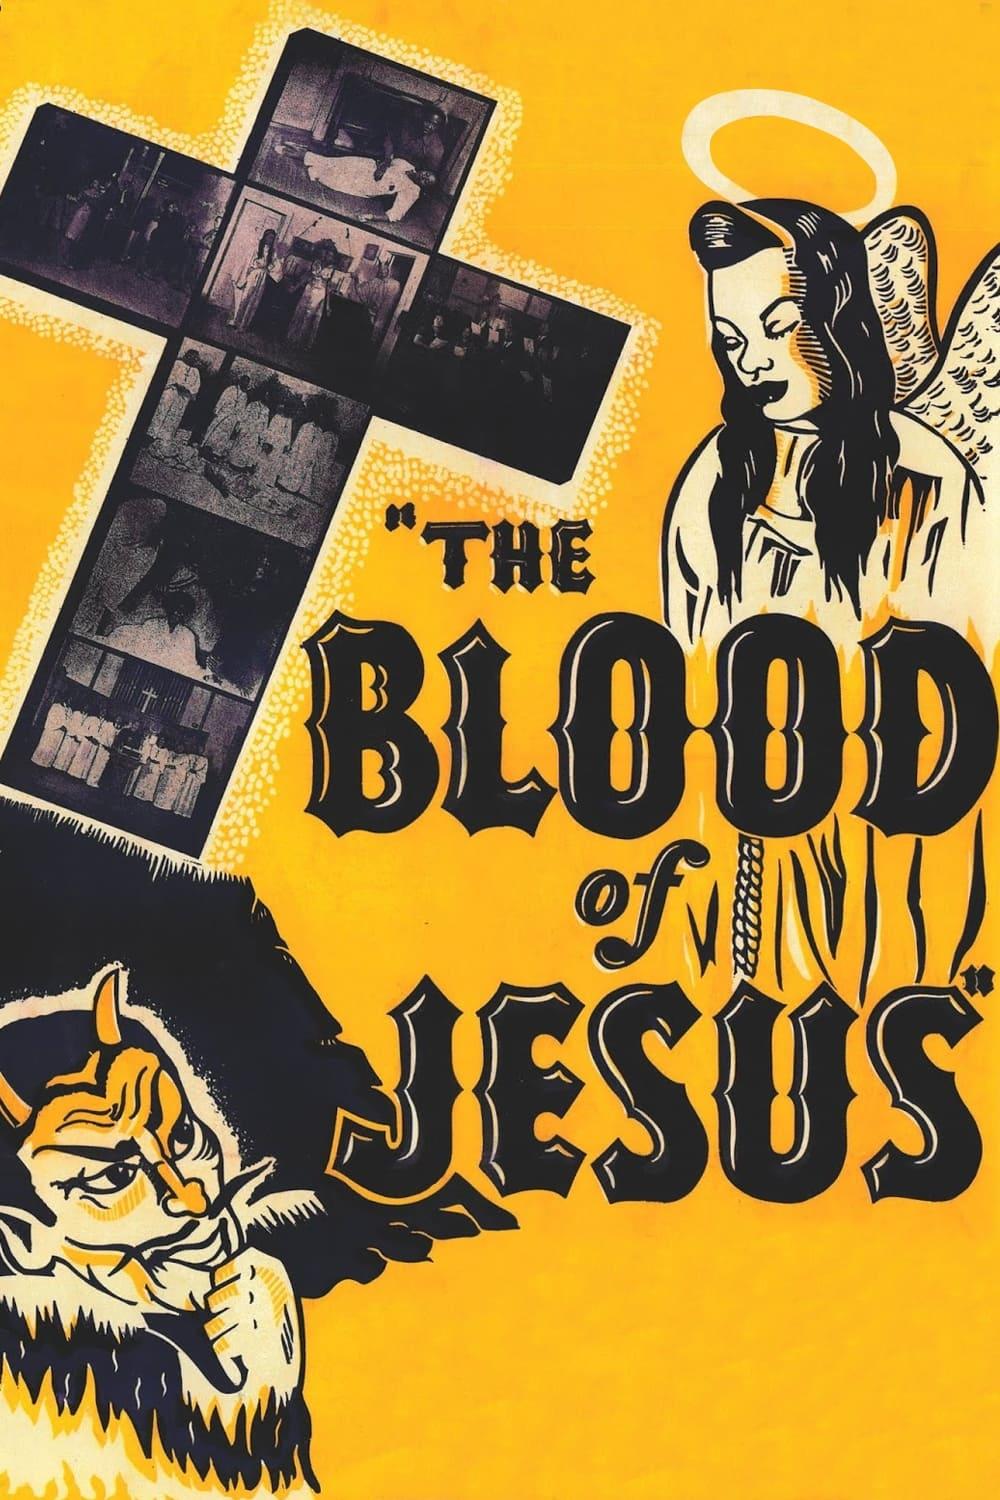 The Blood of Jesus poster